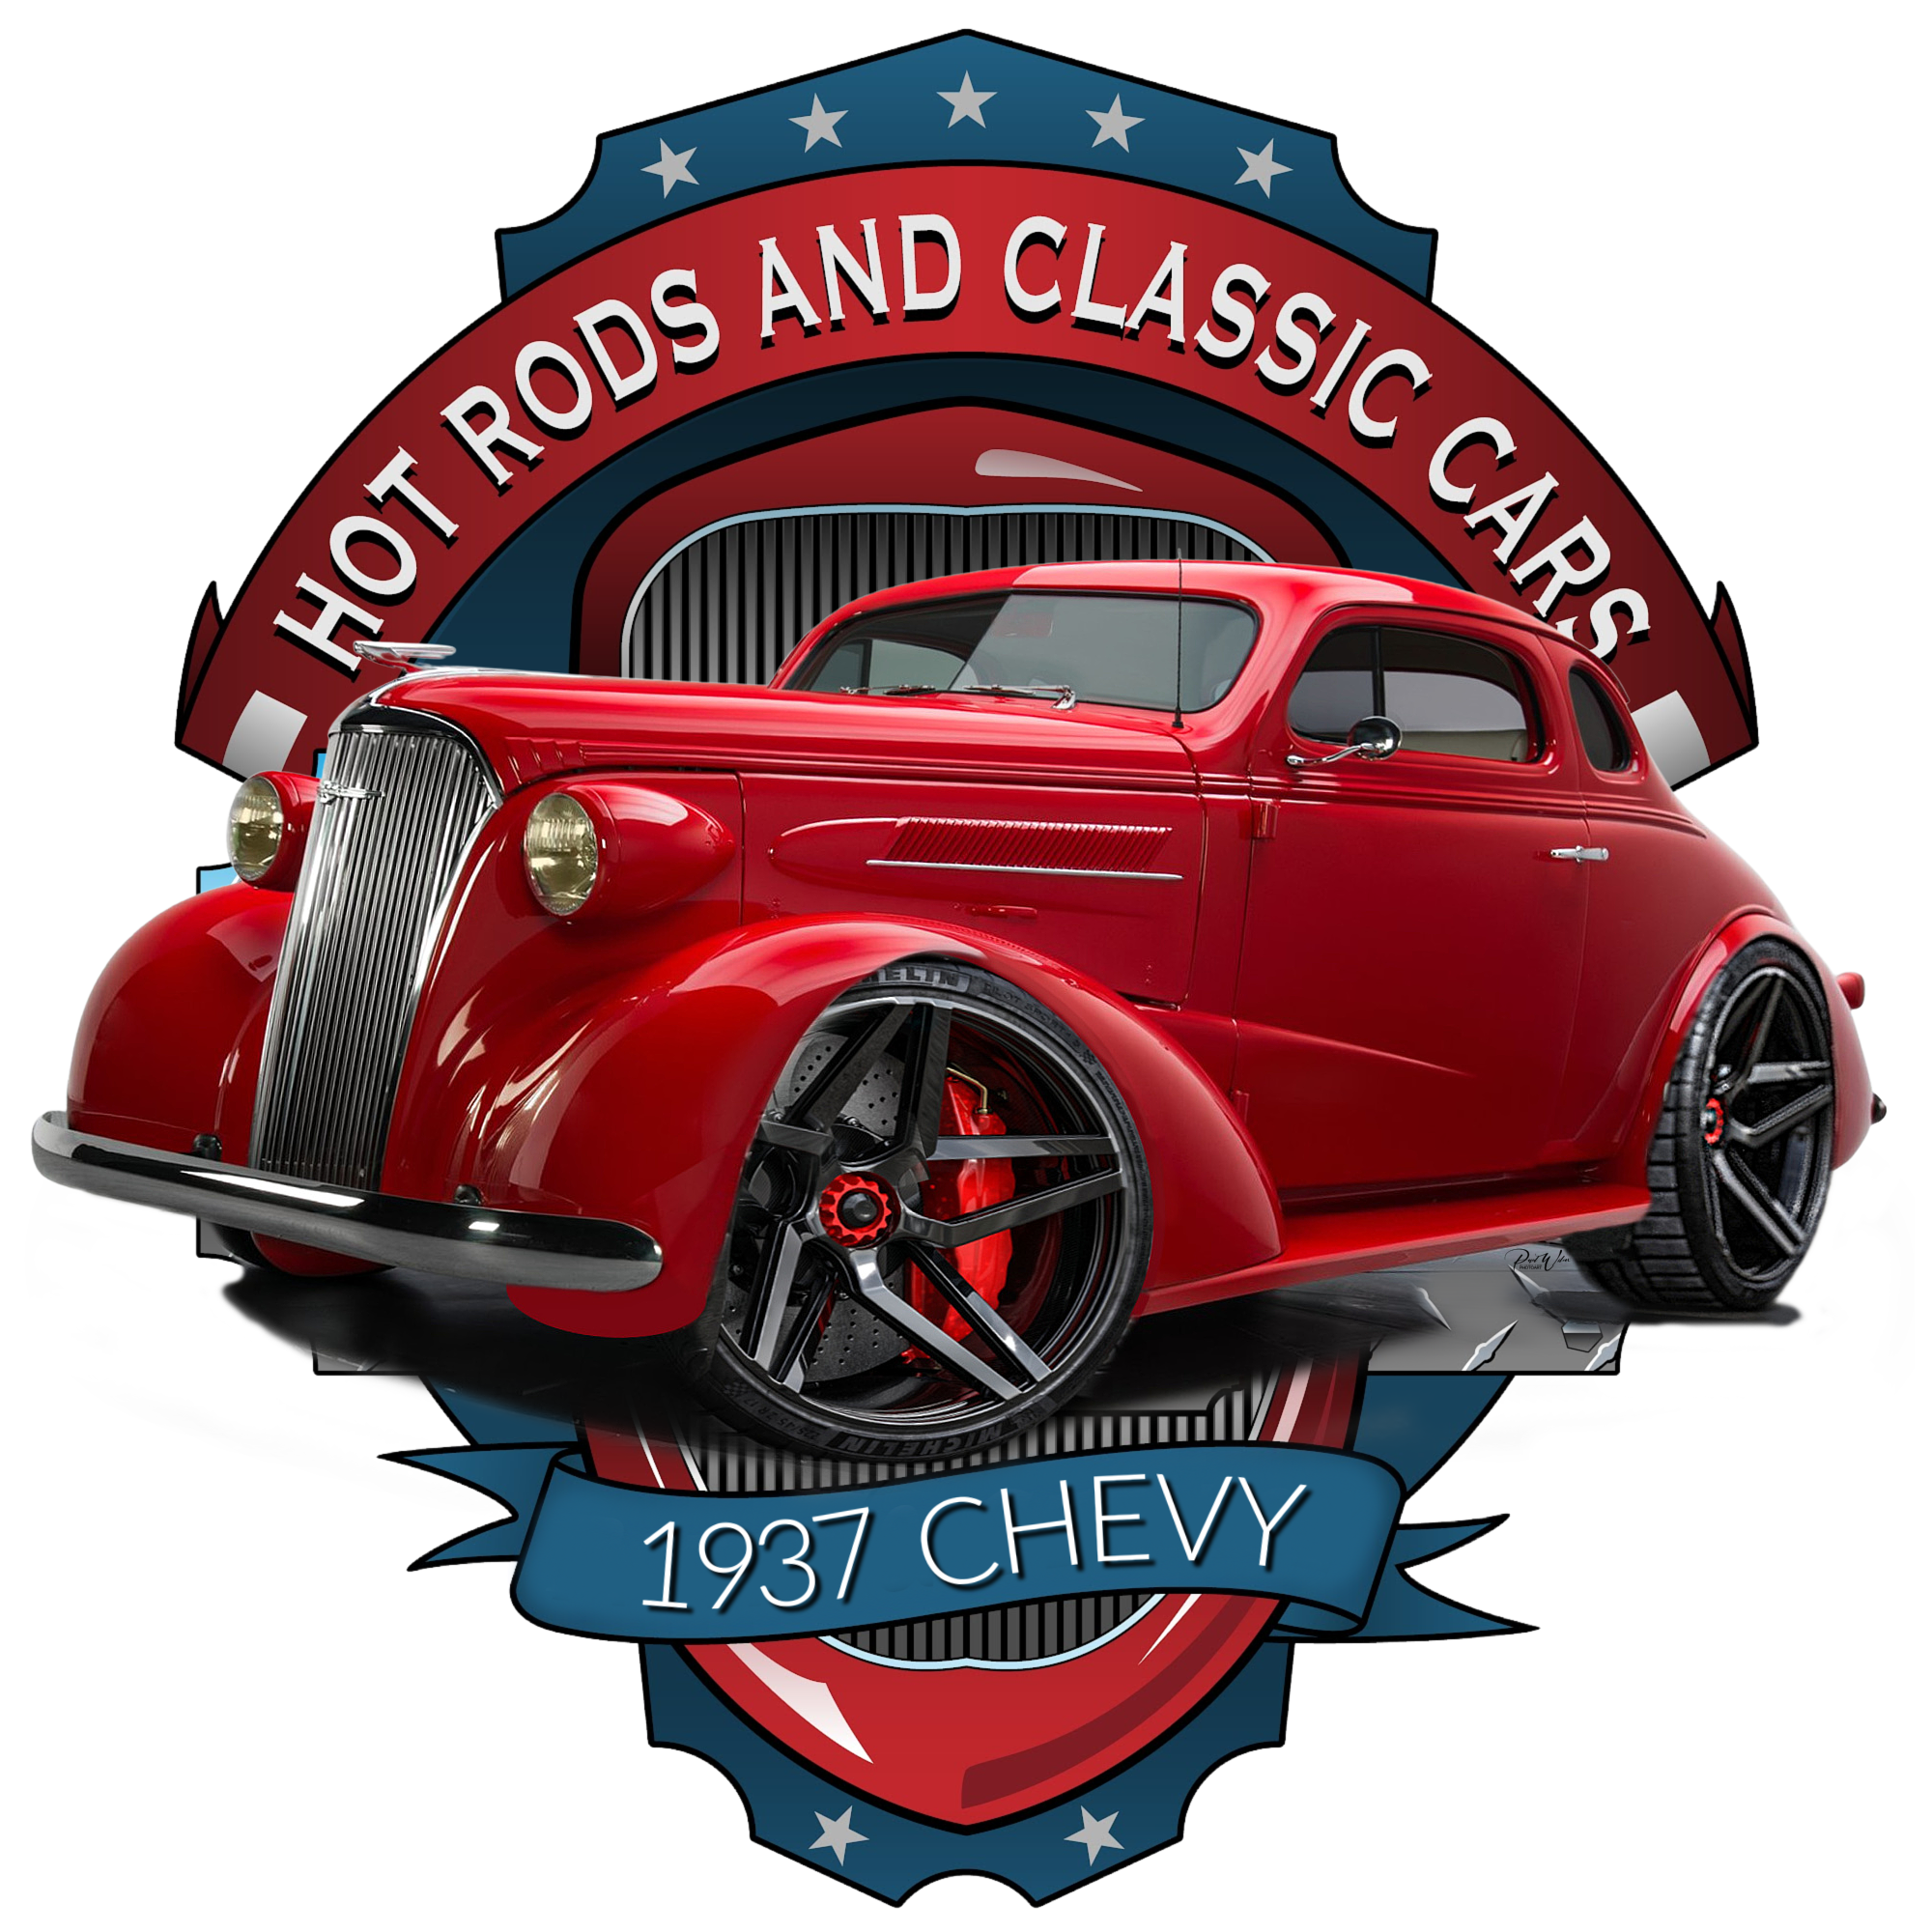 1937 Chevy Classic Hot Rod - Image